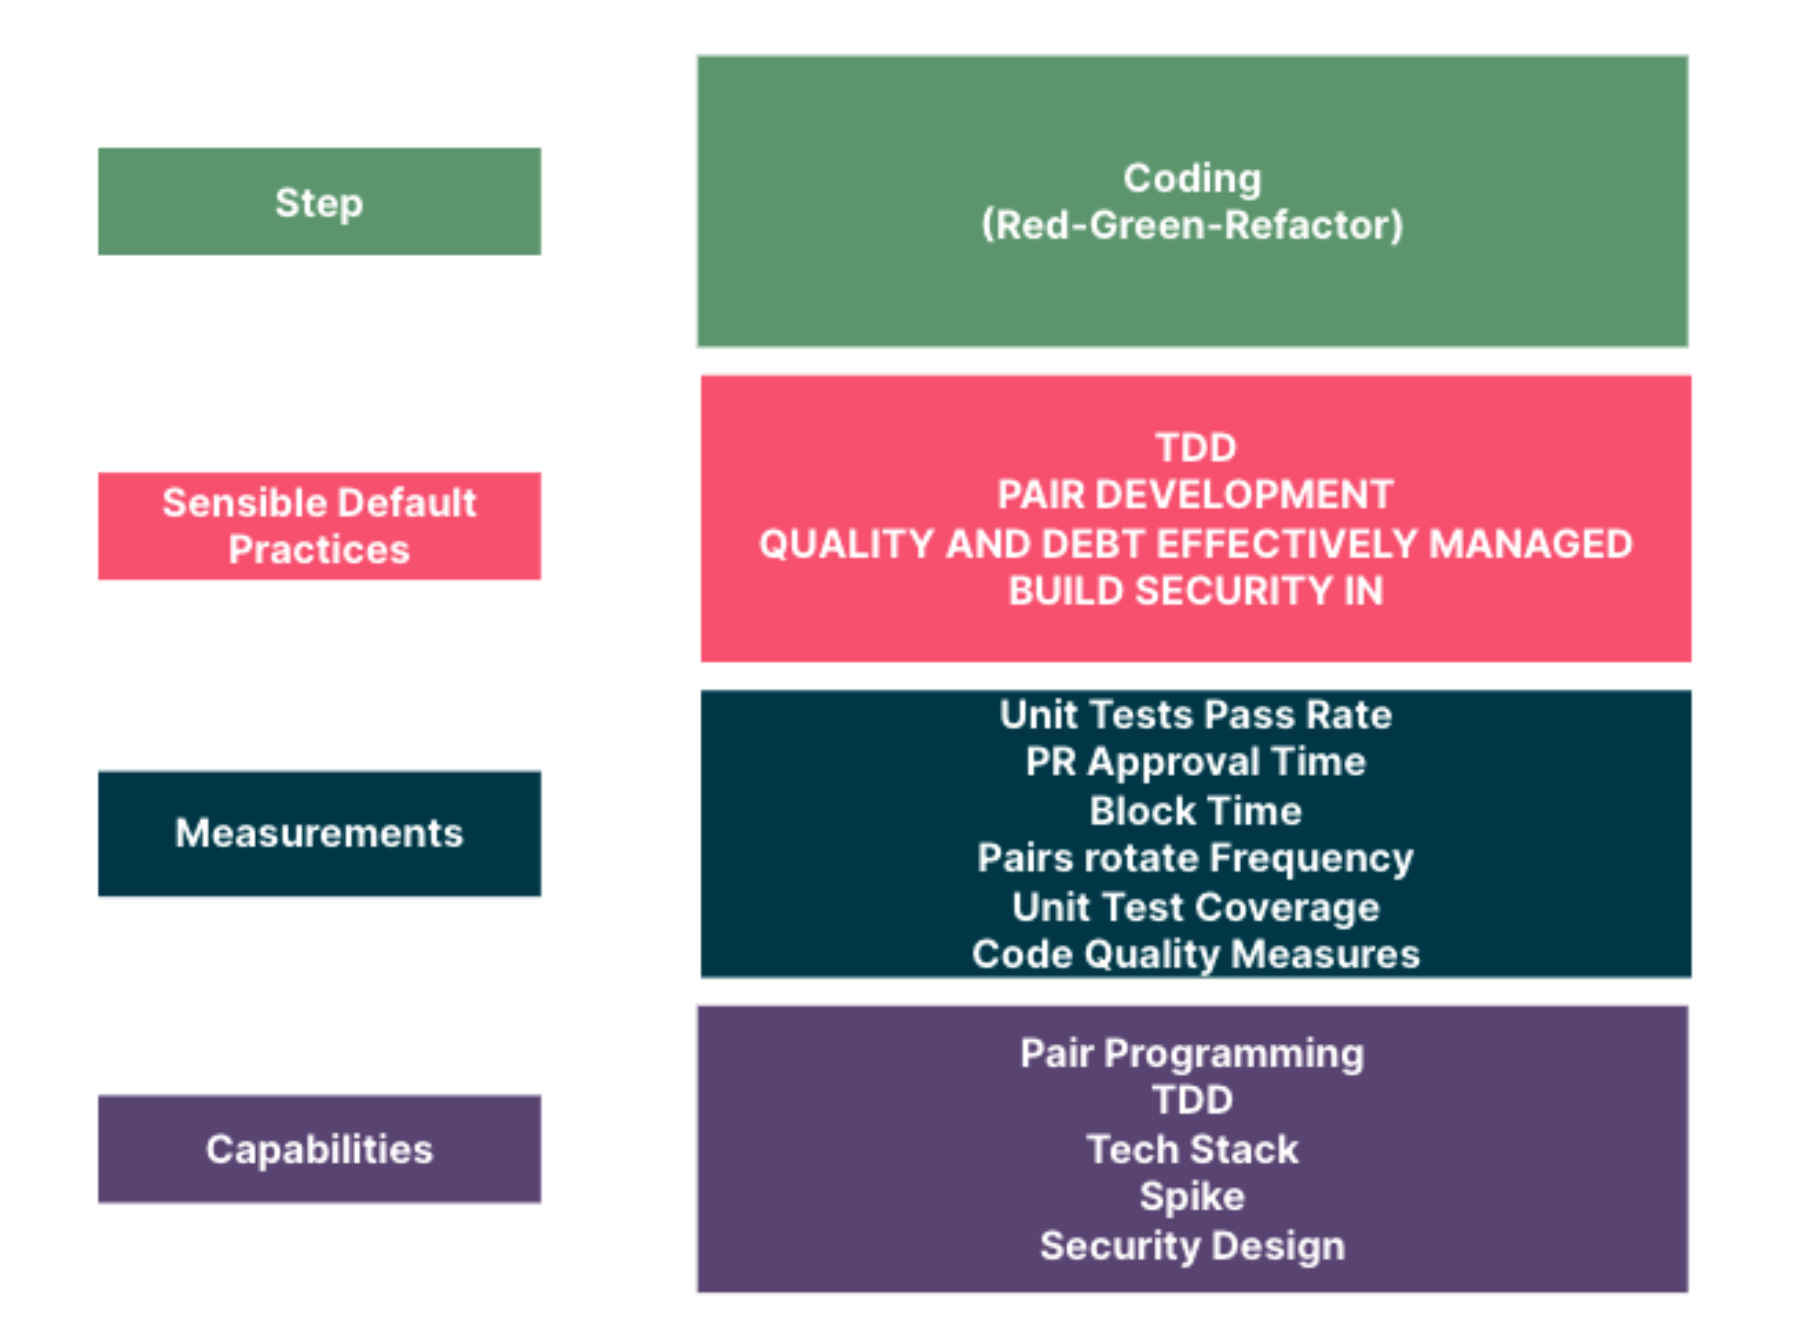 This value map demonstrates what you could do to improve engineering productivity at the coding stage, from the perspective of sensible default practices, measurements and capabilities